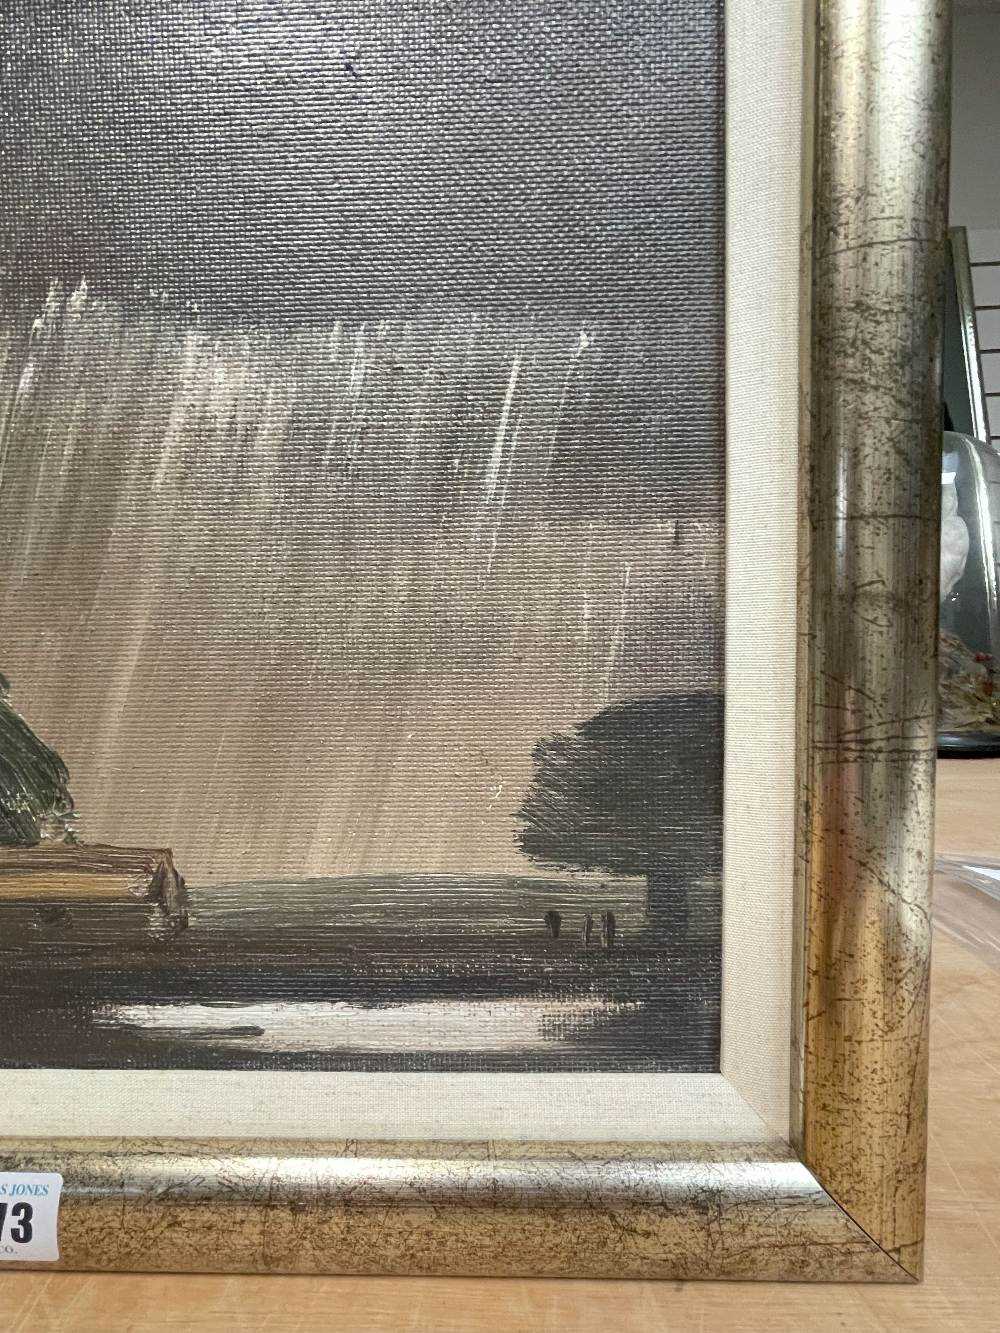 ‡ THEODORE MAJOR (1908-1999), oil on board - Storm at Farm, landscape with farm buildings and - Image 6 of 25